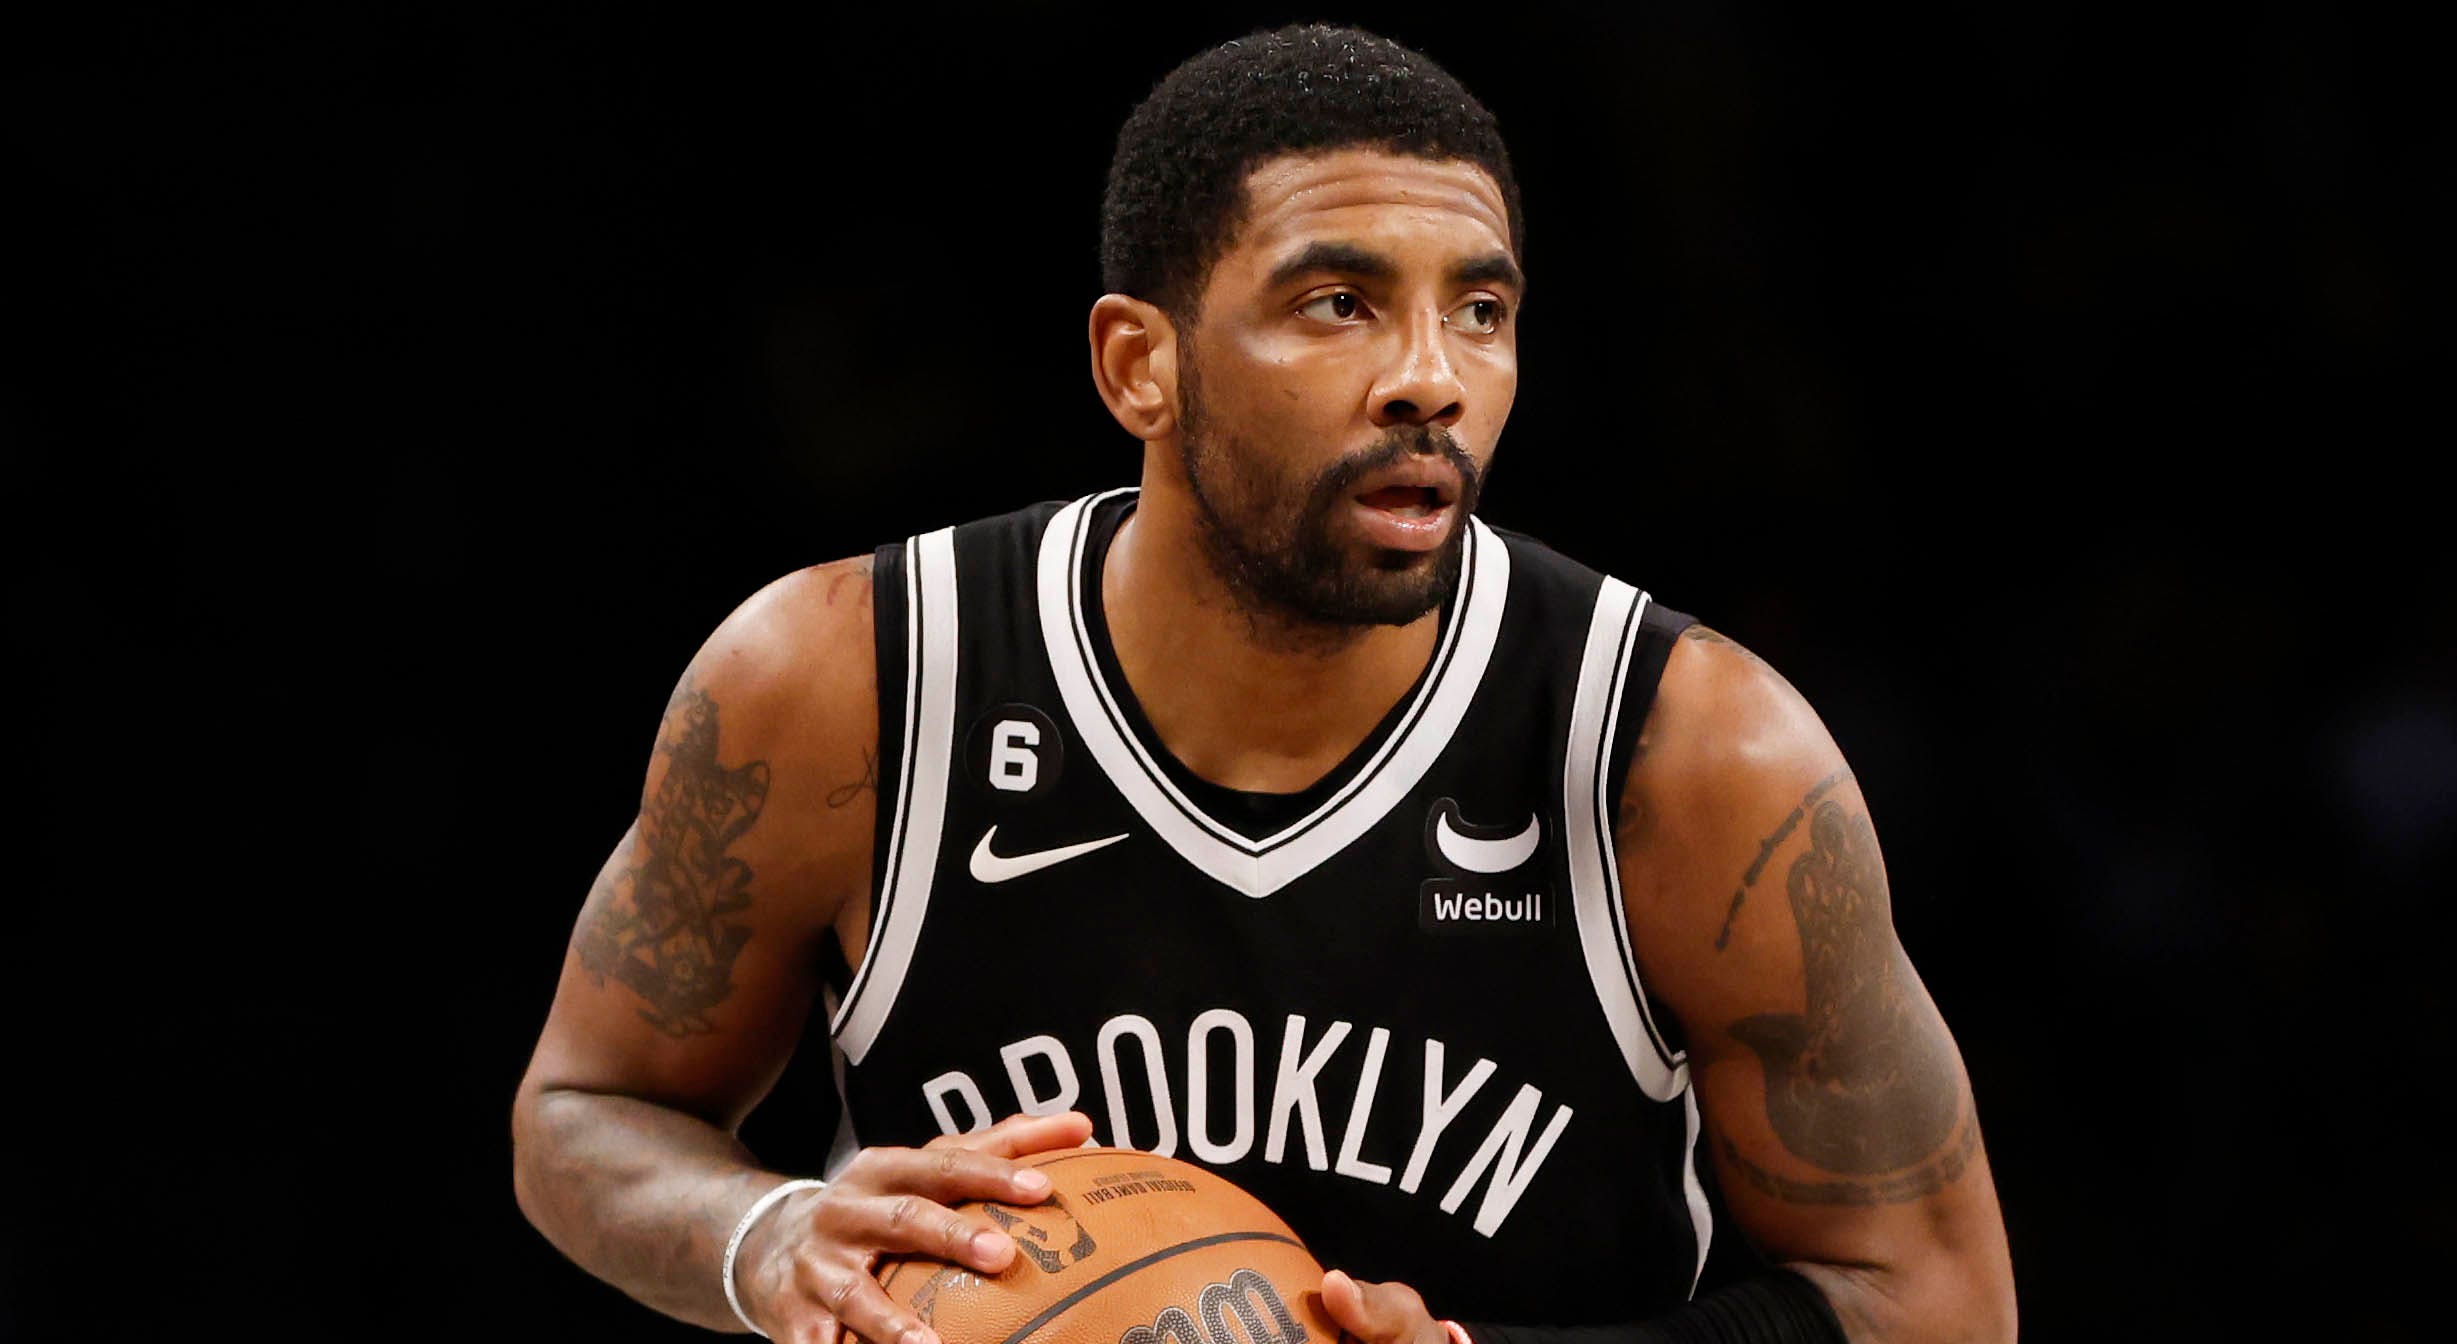 This Nets-Wizards trade could get Spencer Dinwiddie to Washington